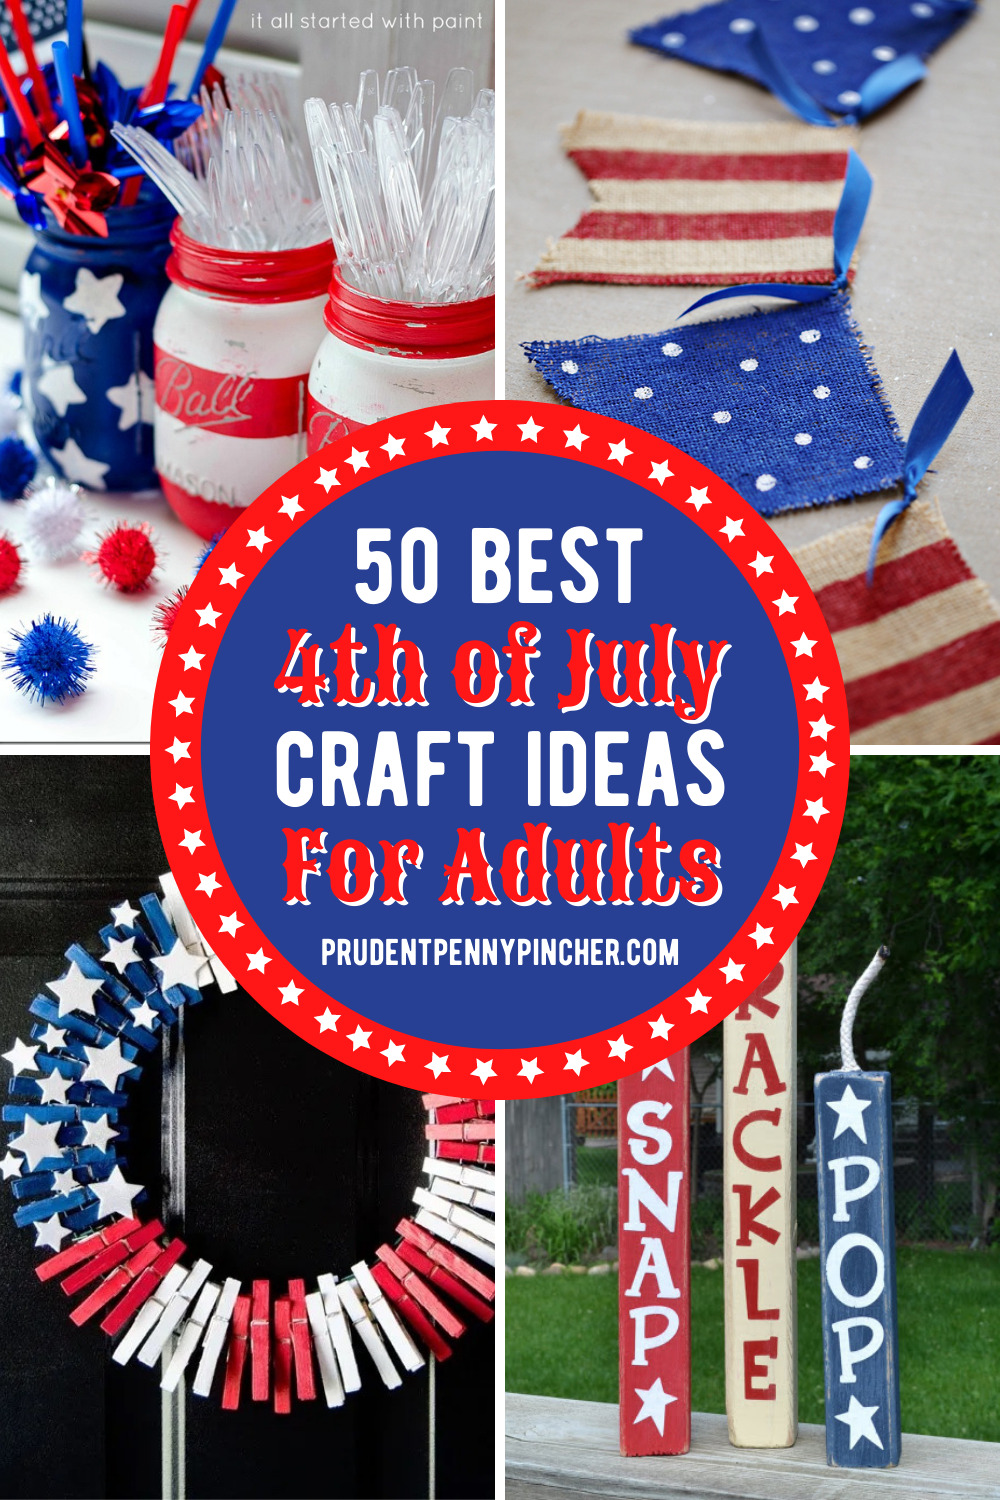 50 Patriotic 4th of July Crafts for Adults - Prudent Penny Pincher